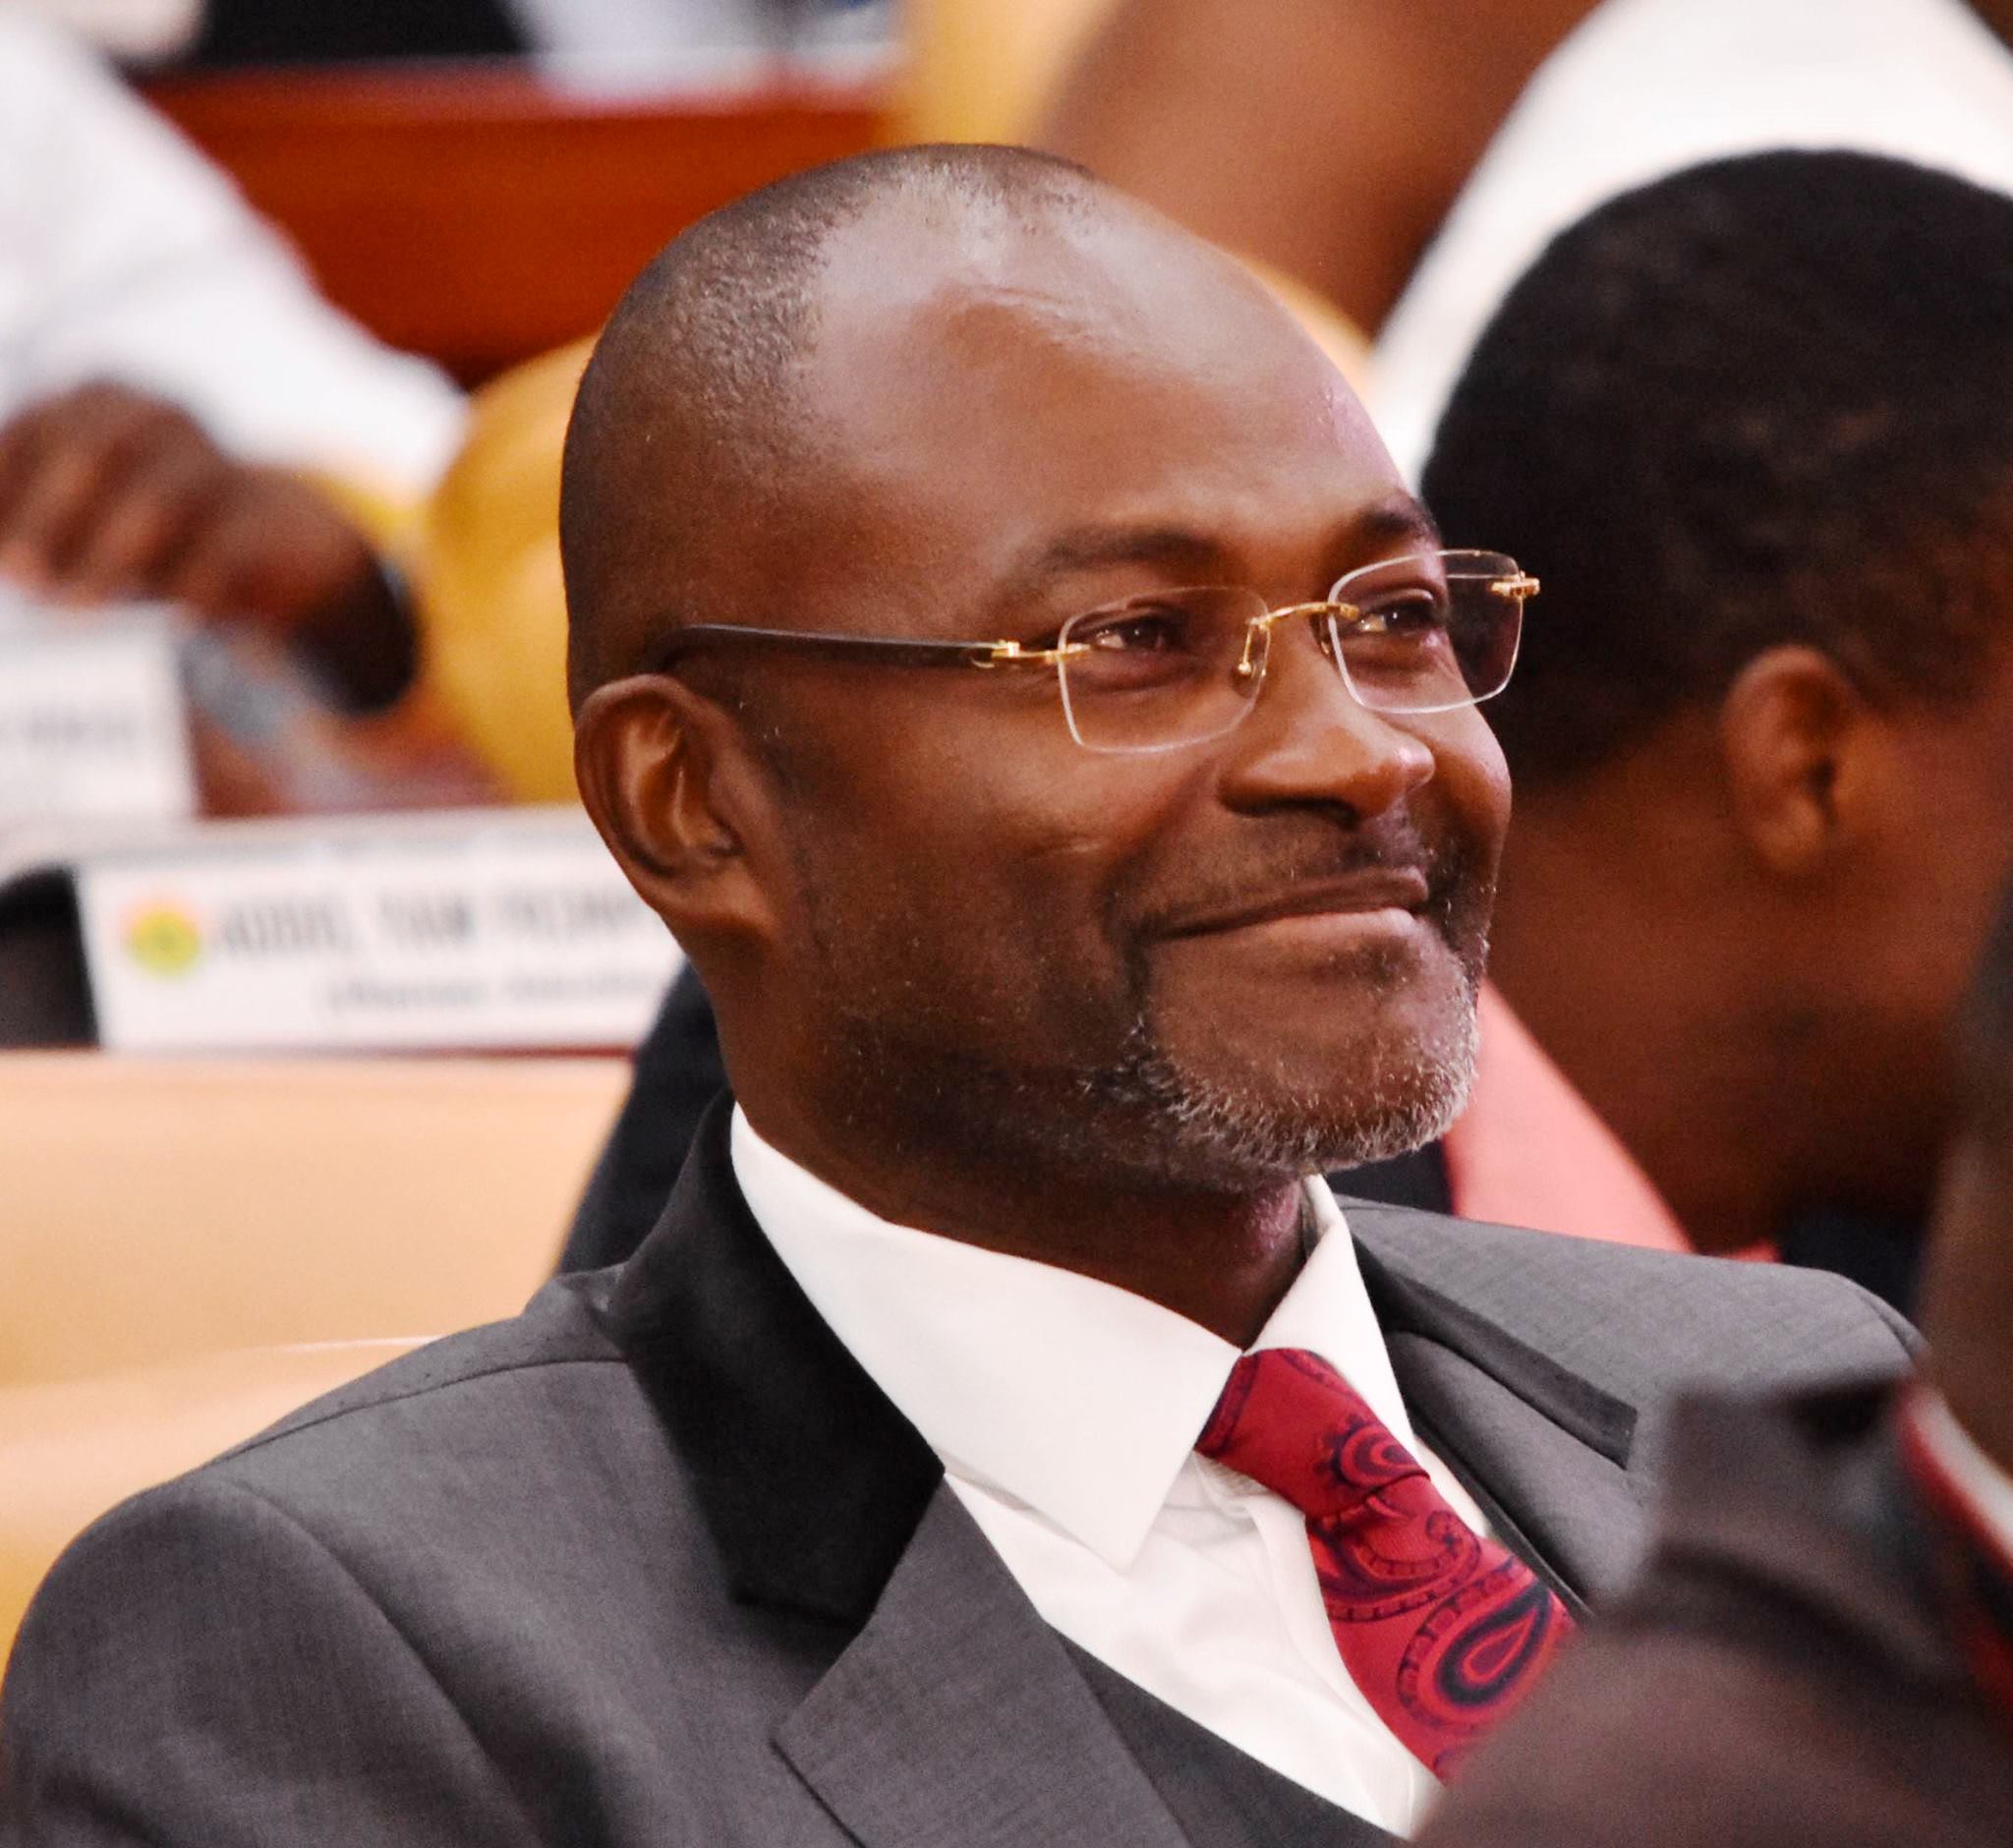 Relying on pastors for your destiny will make you broke - Kennedy Agyapong cautions